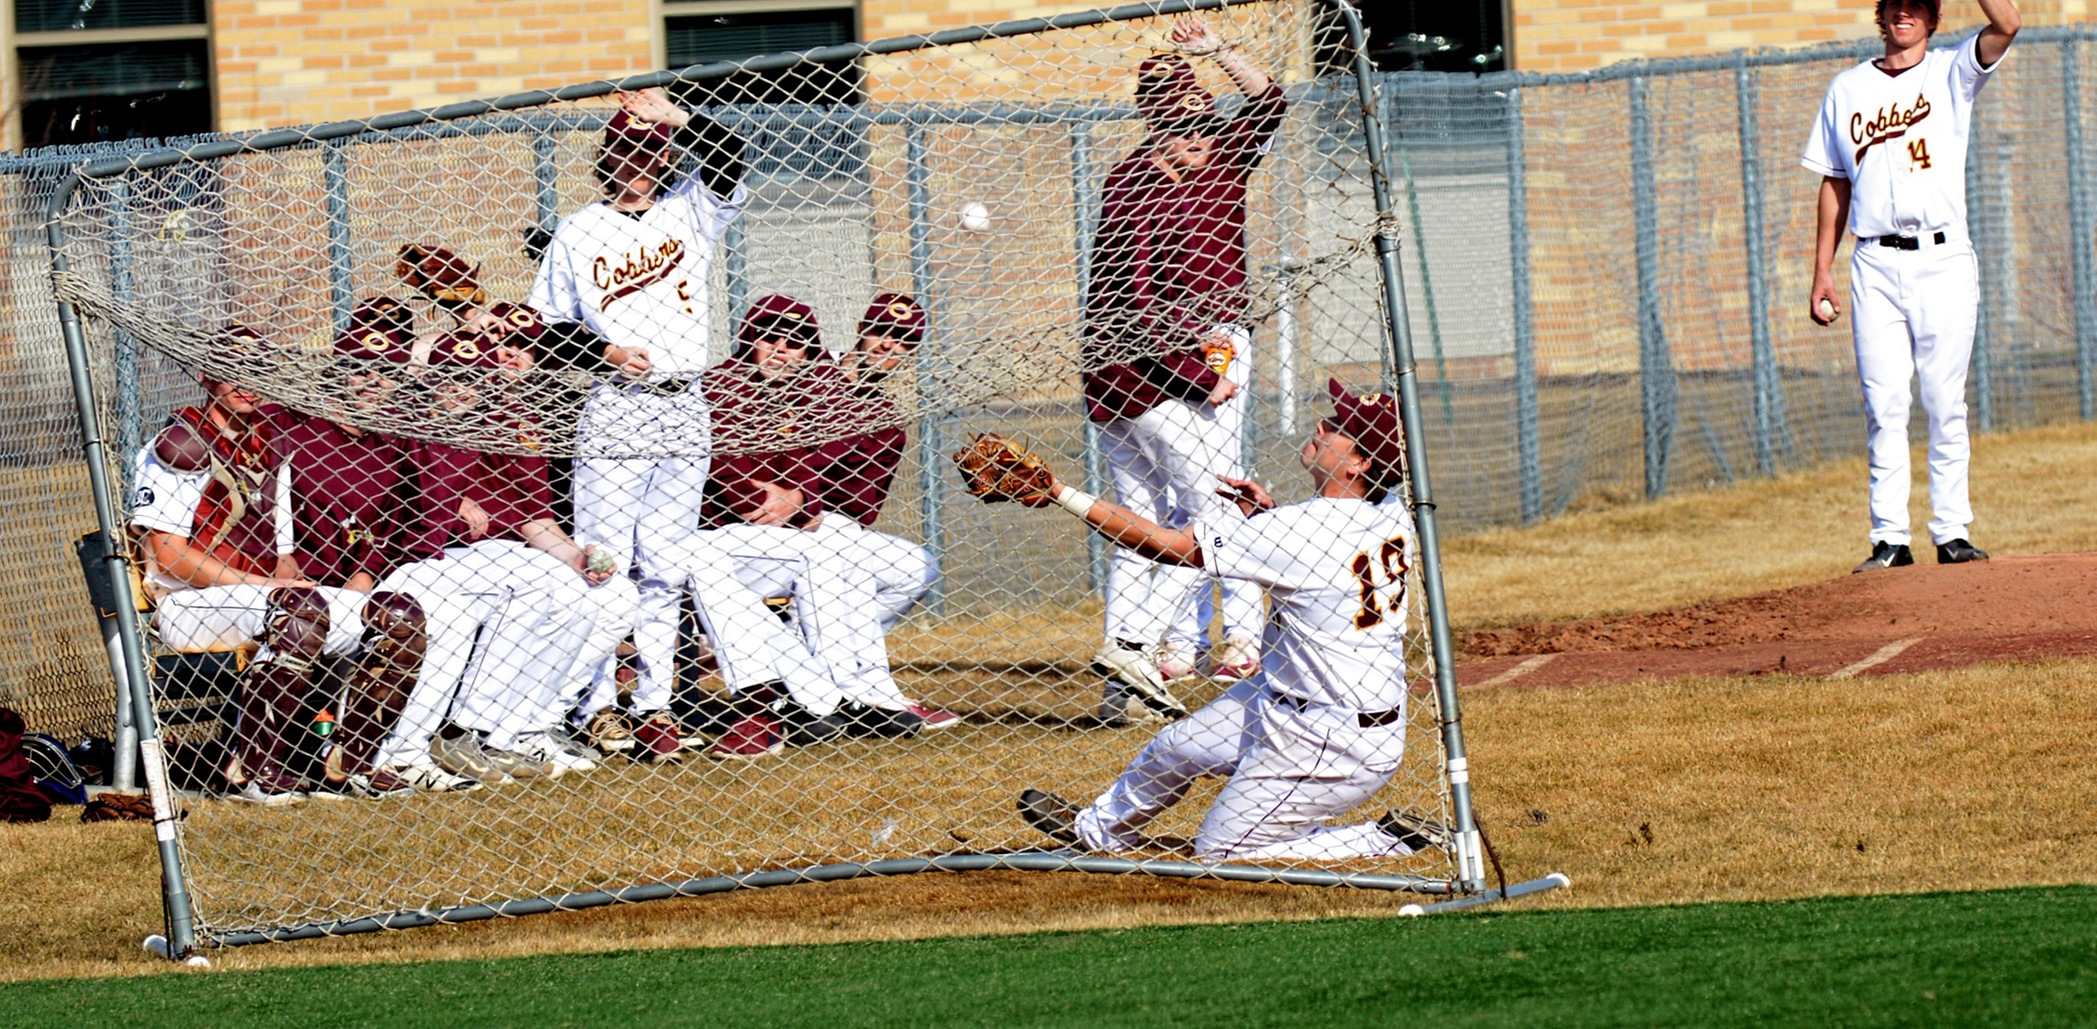 Senior third baseman Cody Rahman goes behind a protective screen to make an "ESPN Top 10" sliding catch in foul ground during the Cobbers' 6-5 win over Jamestown.